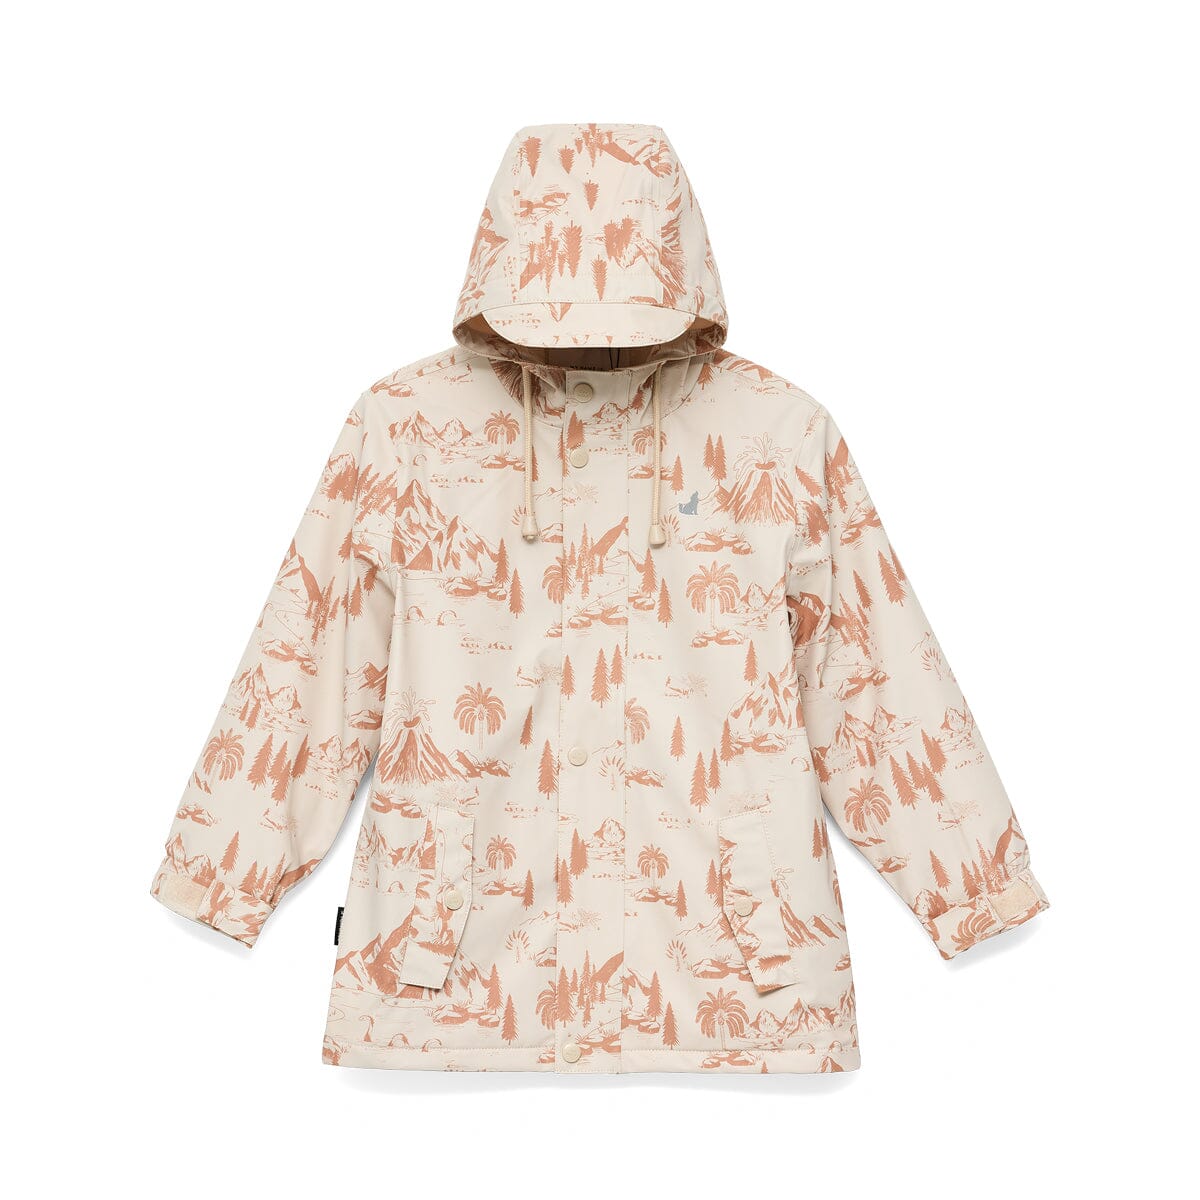 Crywolf | EXPLORER JACKET - Terracotta Landscape *** PRE ORDER / DUE EARLY-MID APRIL *** Girls Crywolf